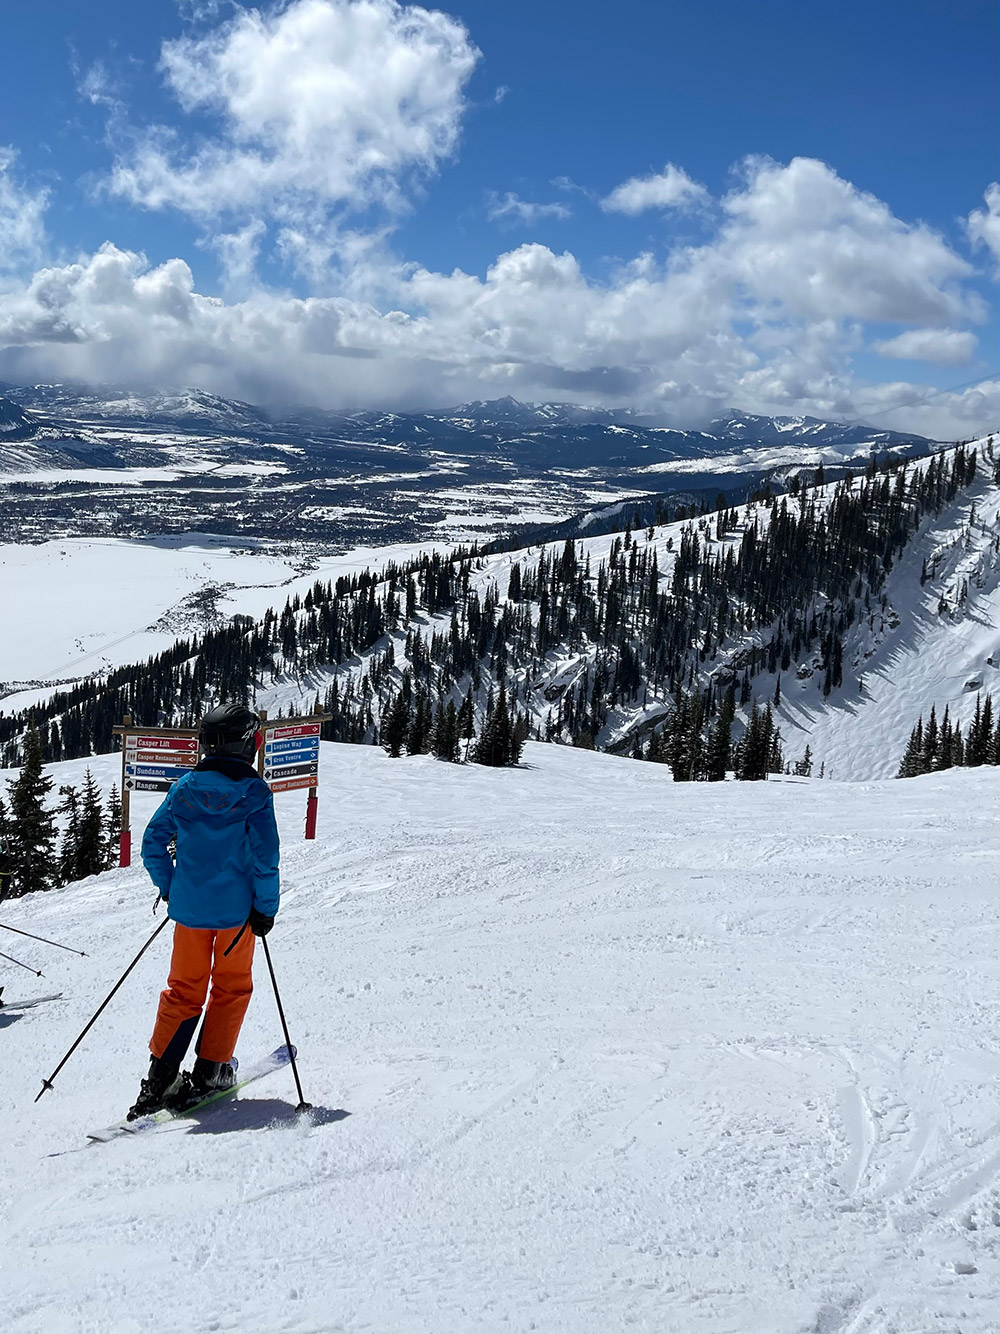 Oliver takes in the fresh air on the slopes at Jackson Hole, Wyoming. March, 2021